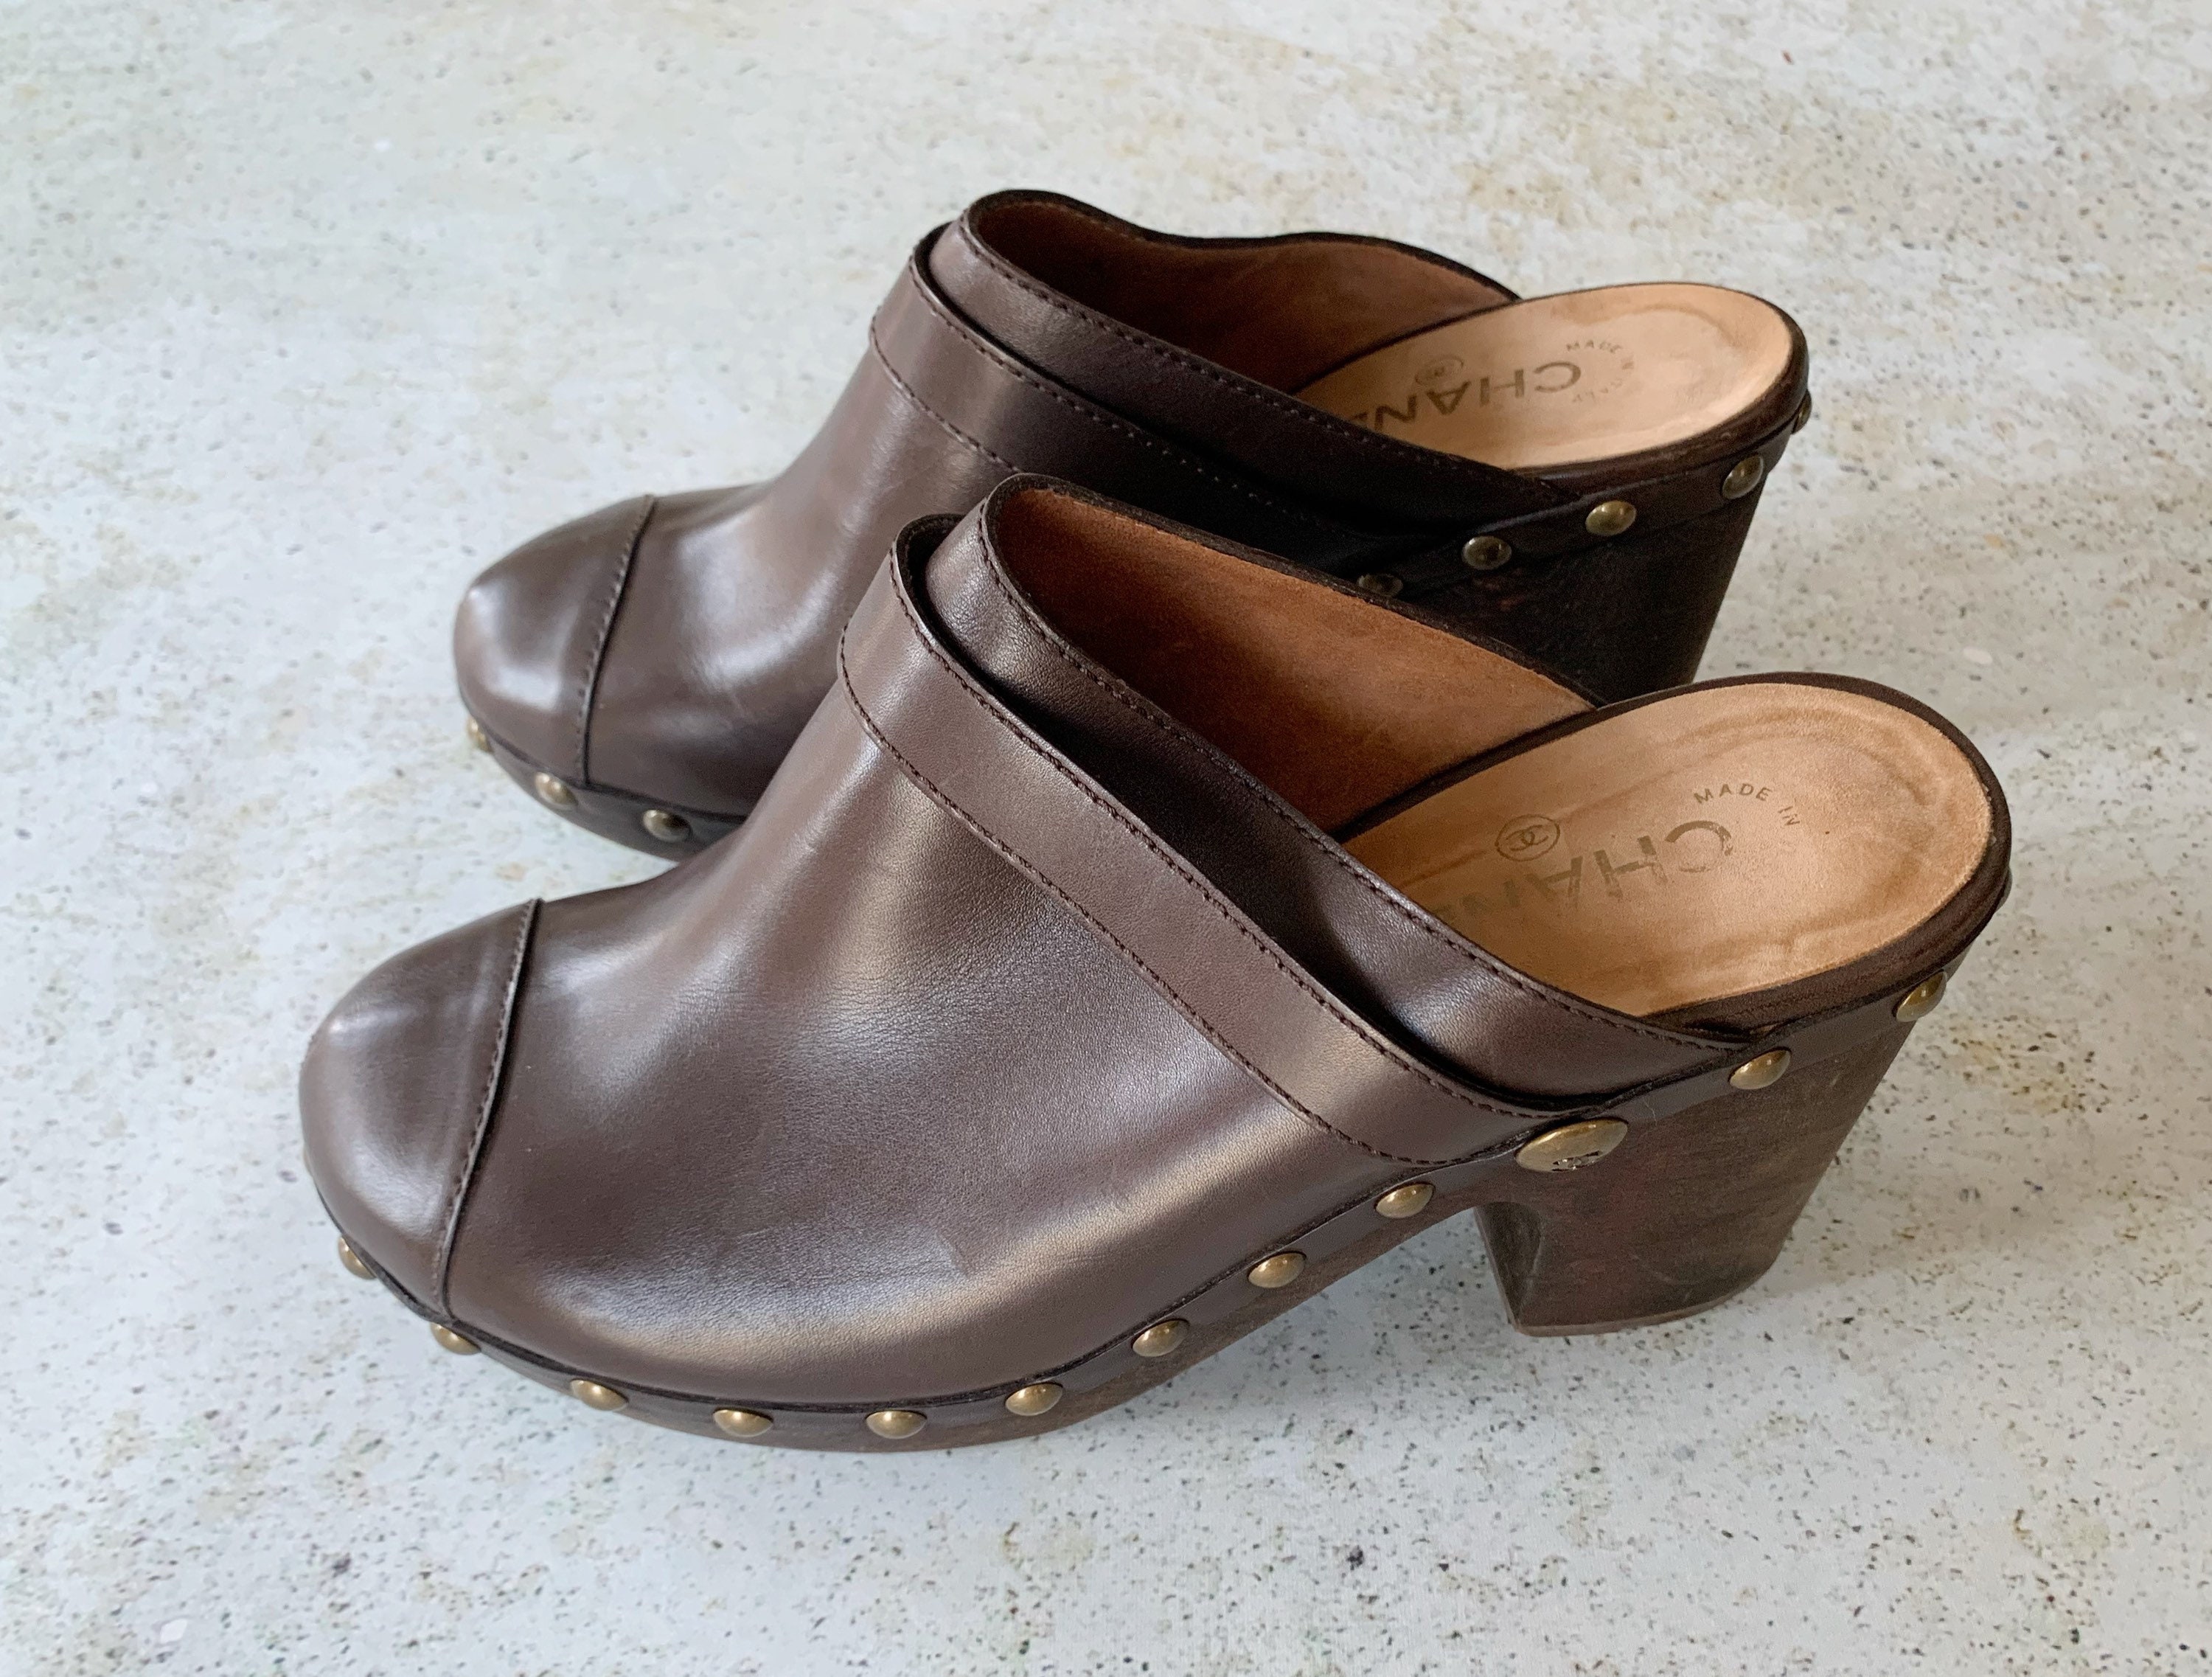 Chanel Studded Leather Wooden Platform Mule Clogs Size 10